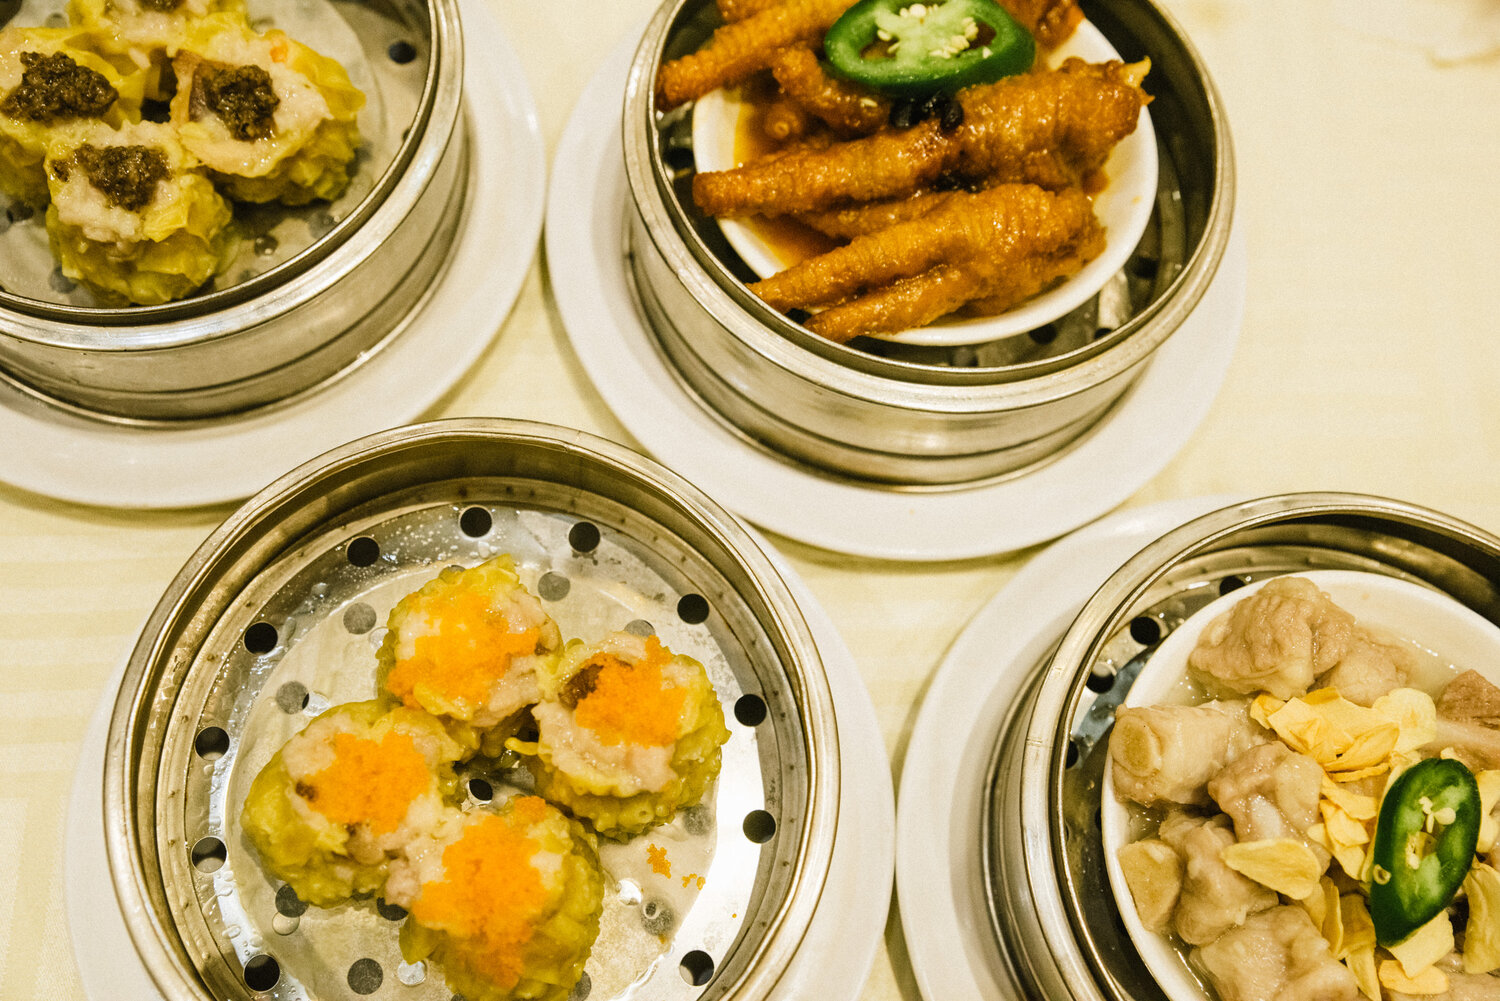 A selection of dim sum from J. Zhou in Tustin.